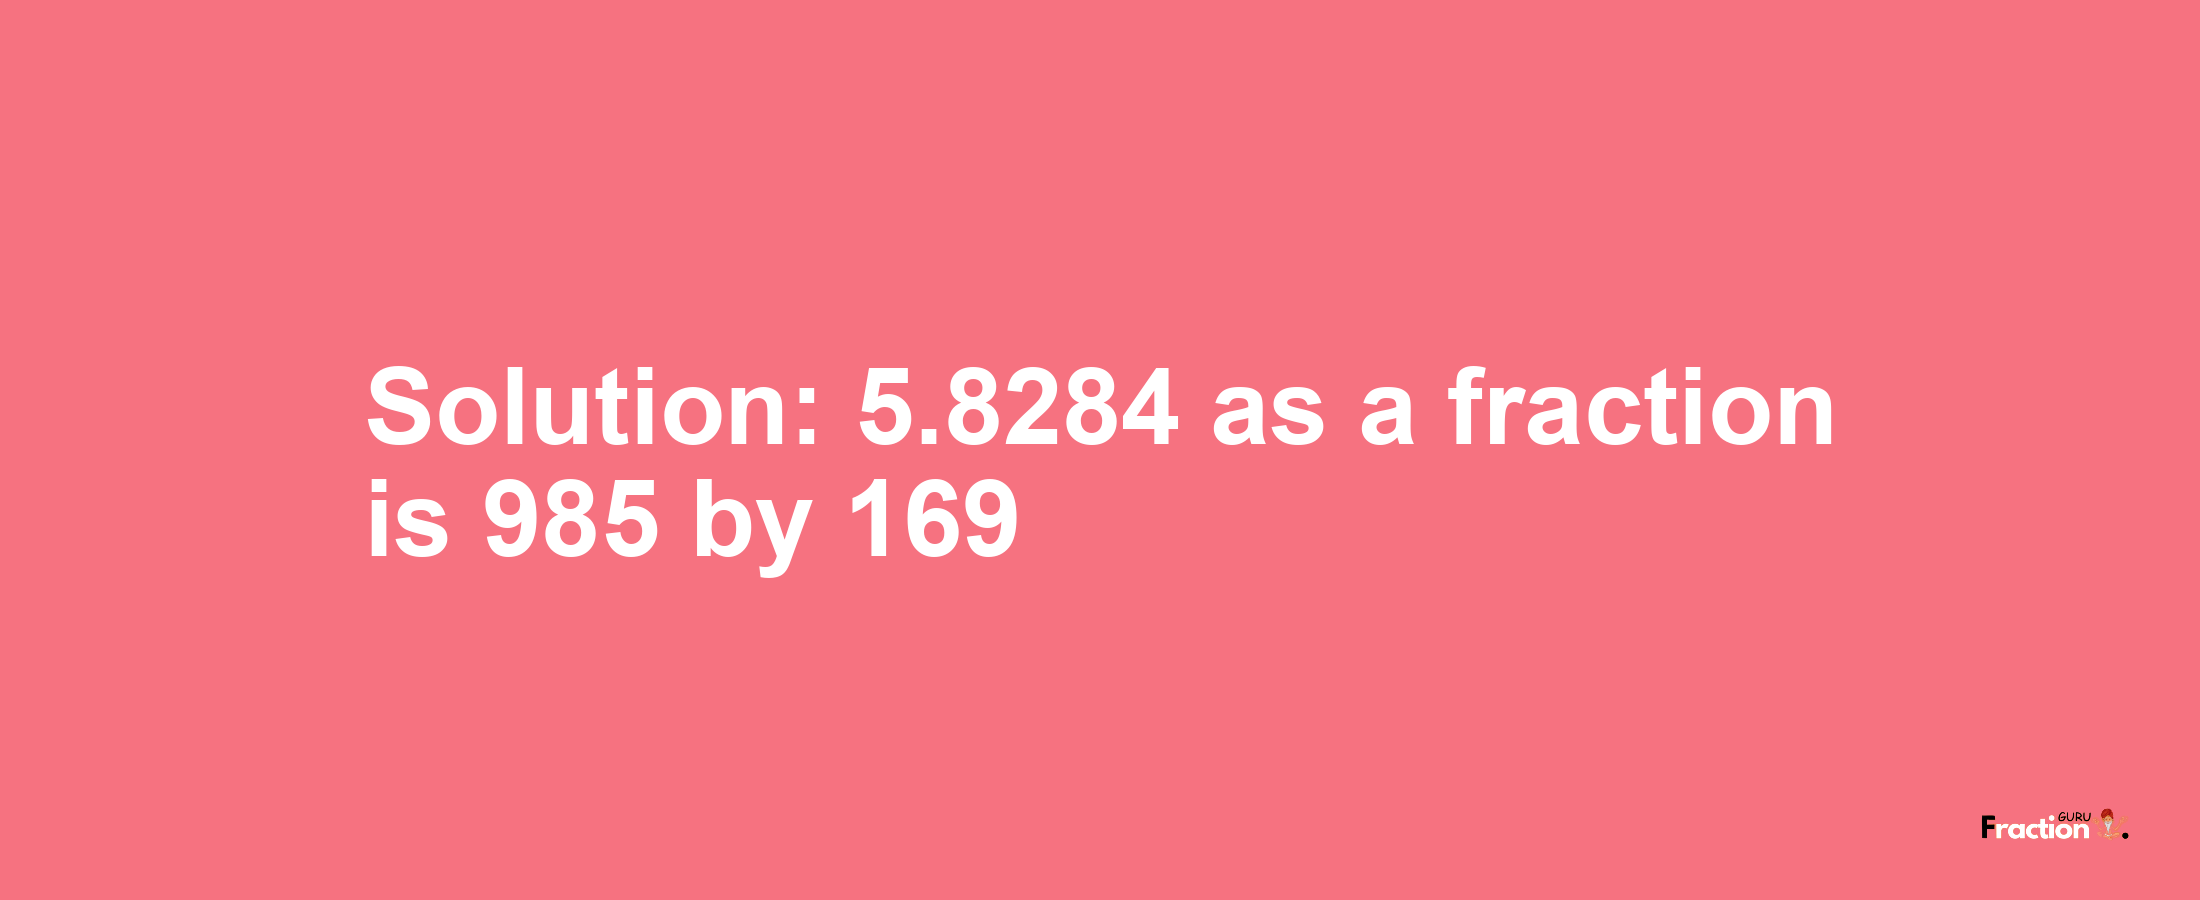 Solution:5.8284 as a fraction is 985/169